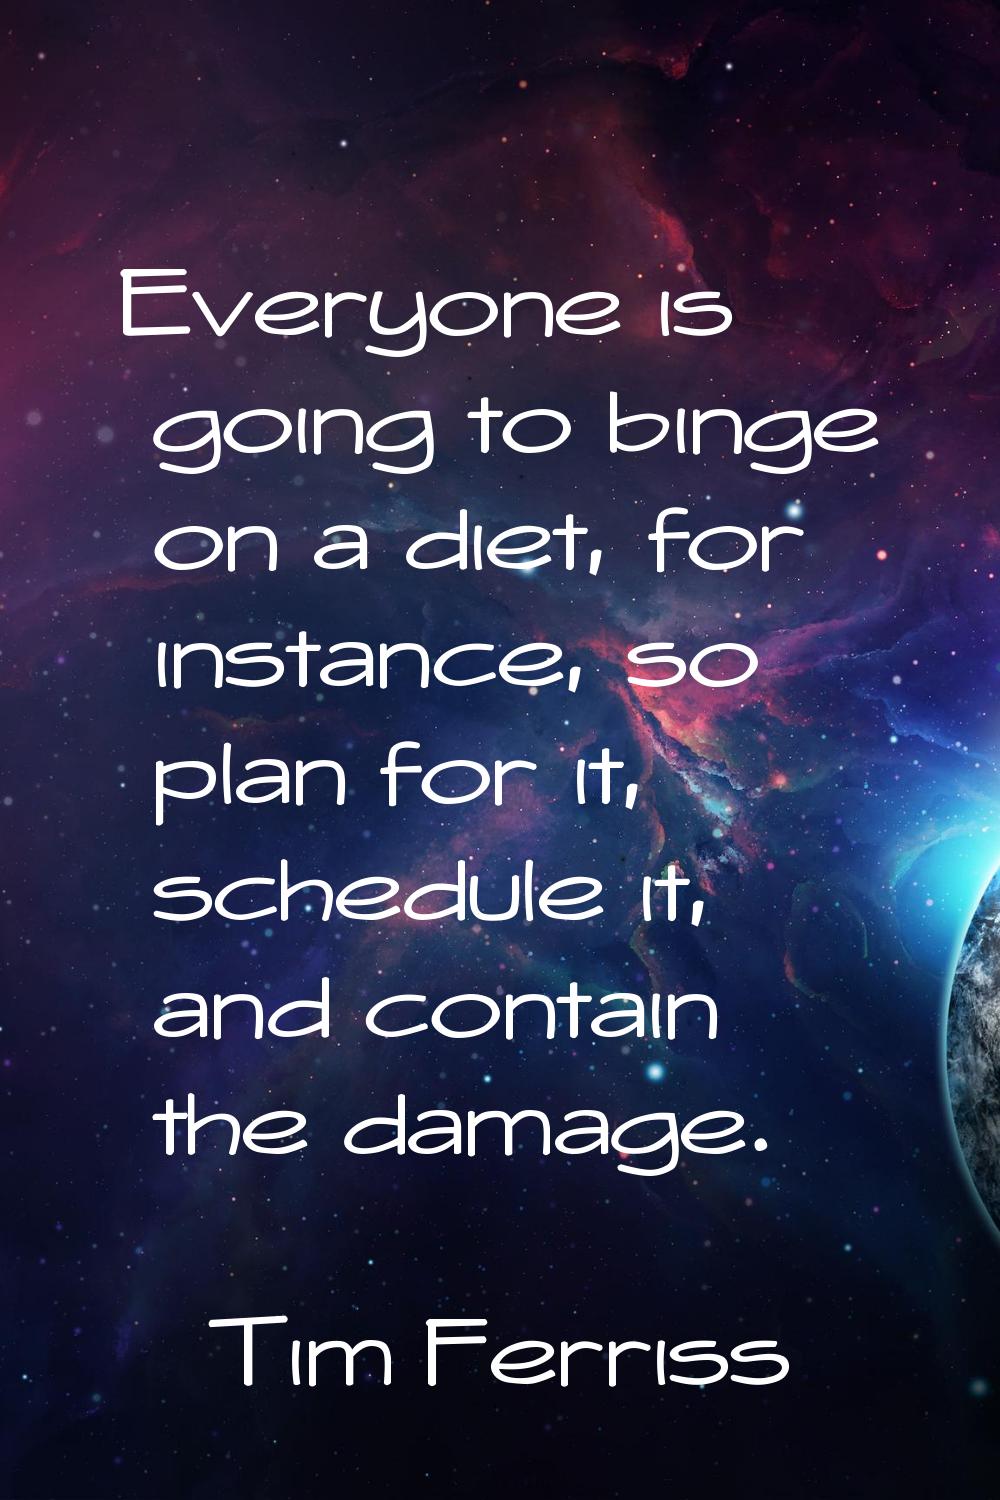 Everyone is going to binge on a diet, for instance, so plan for it, schedule it, and contain the da